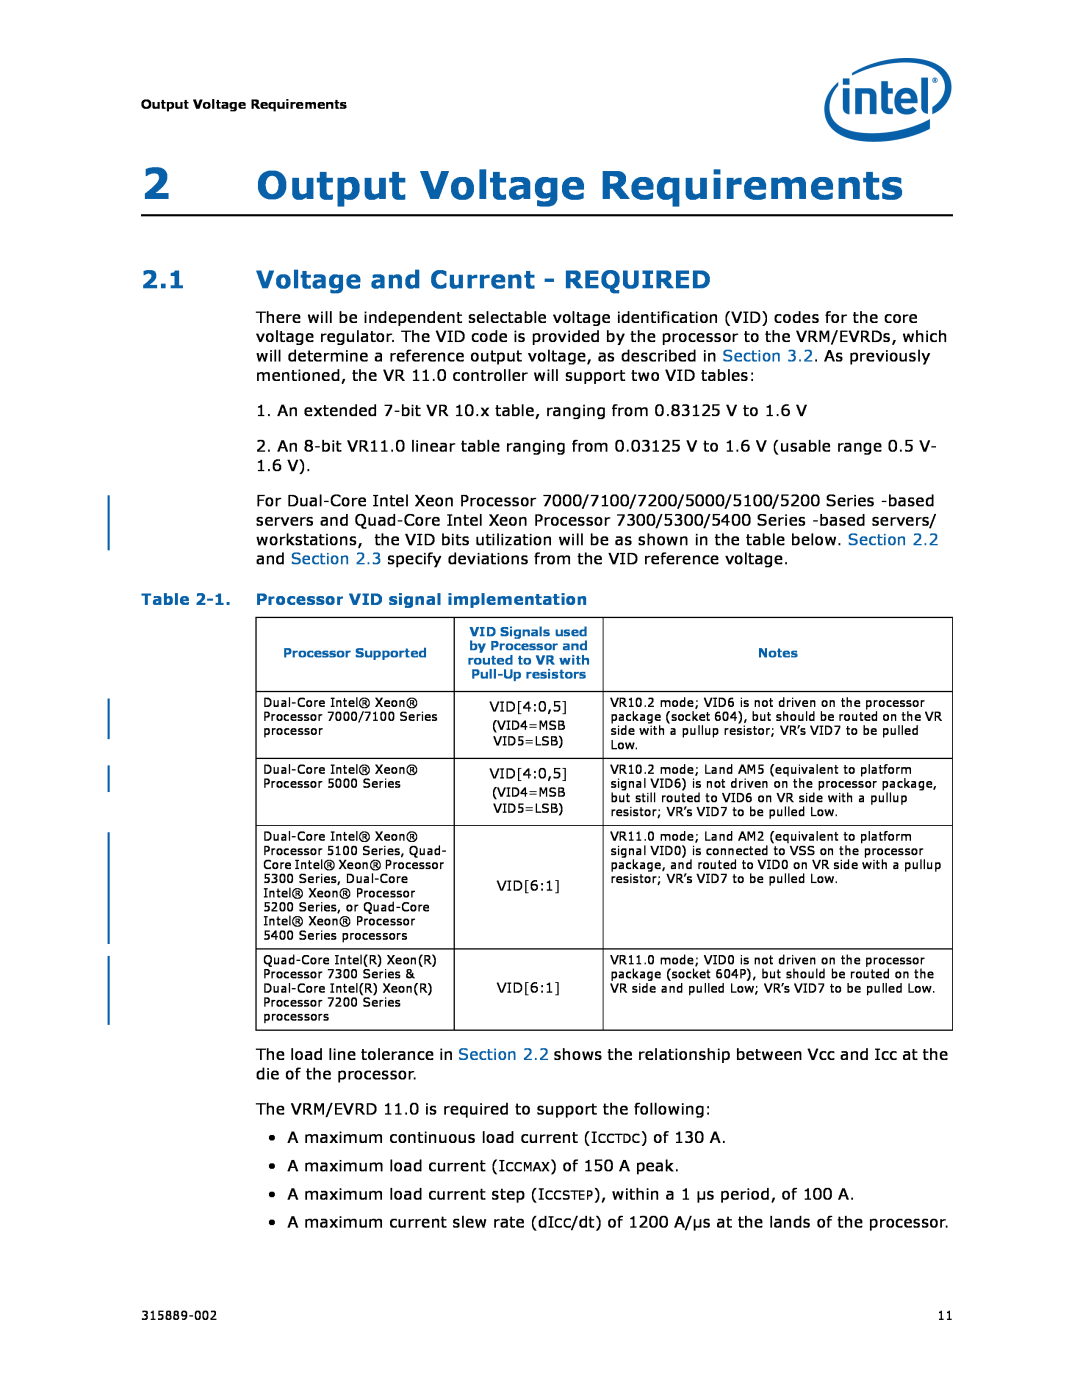 Intel 315889-002 manual 2Output Voltage Requirements, 2.1Voltage and Current - REQUIRED 